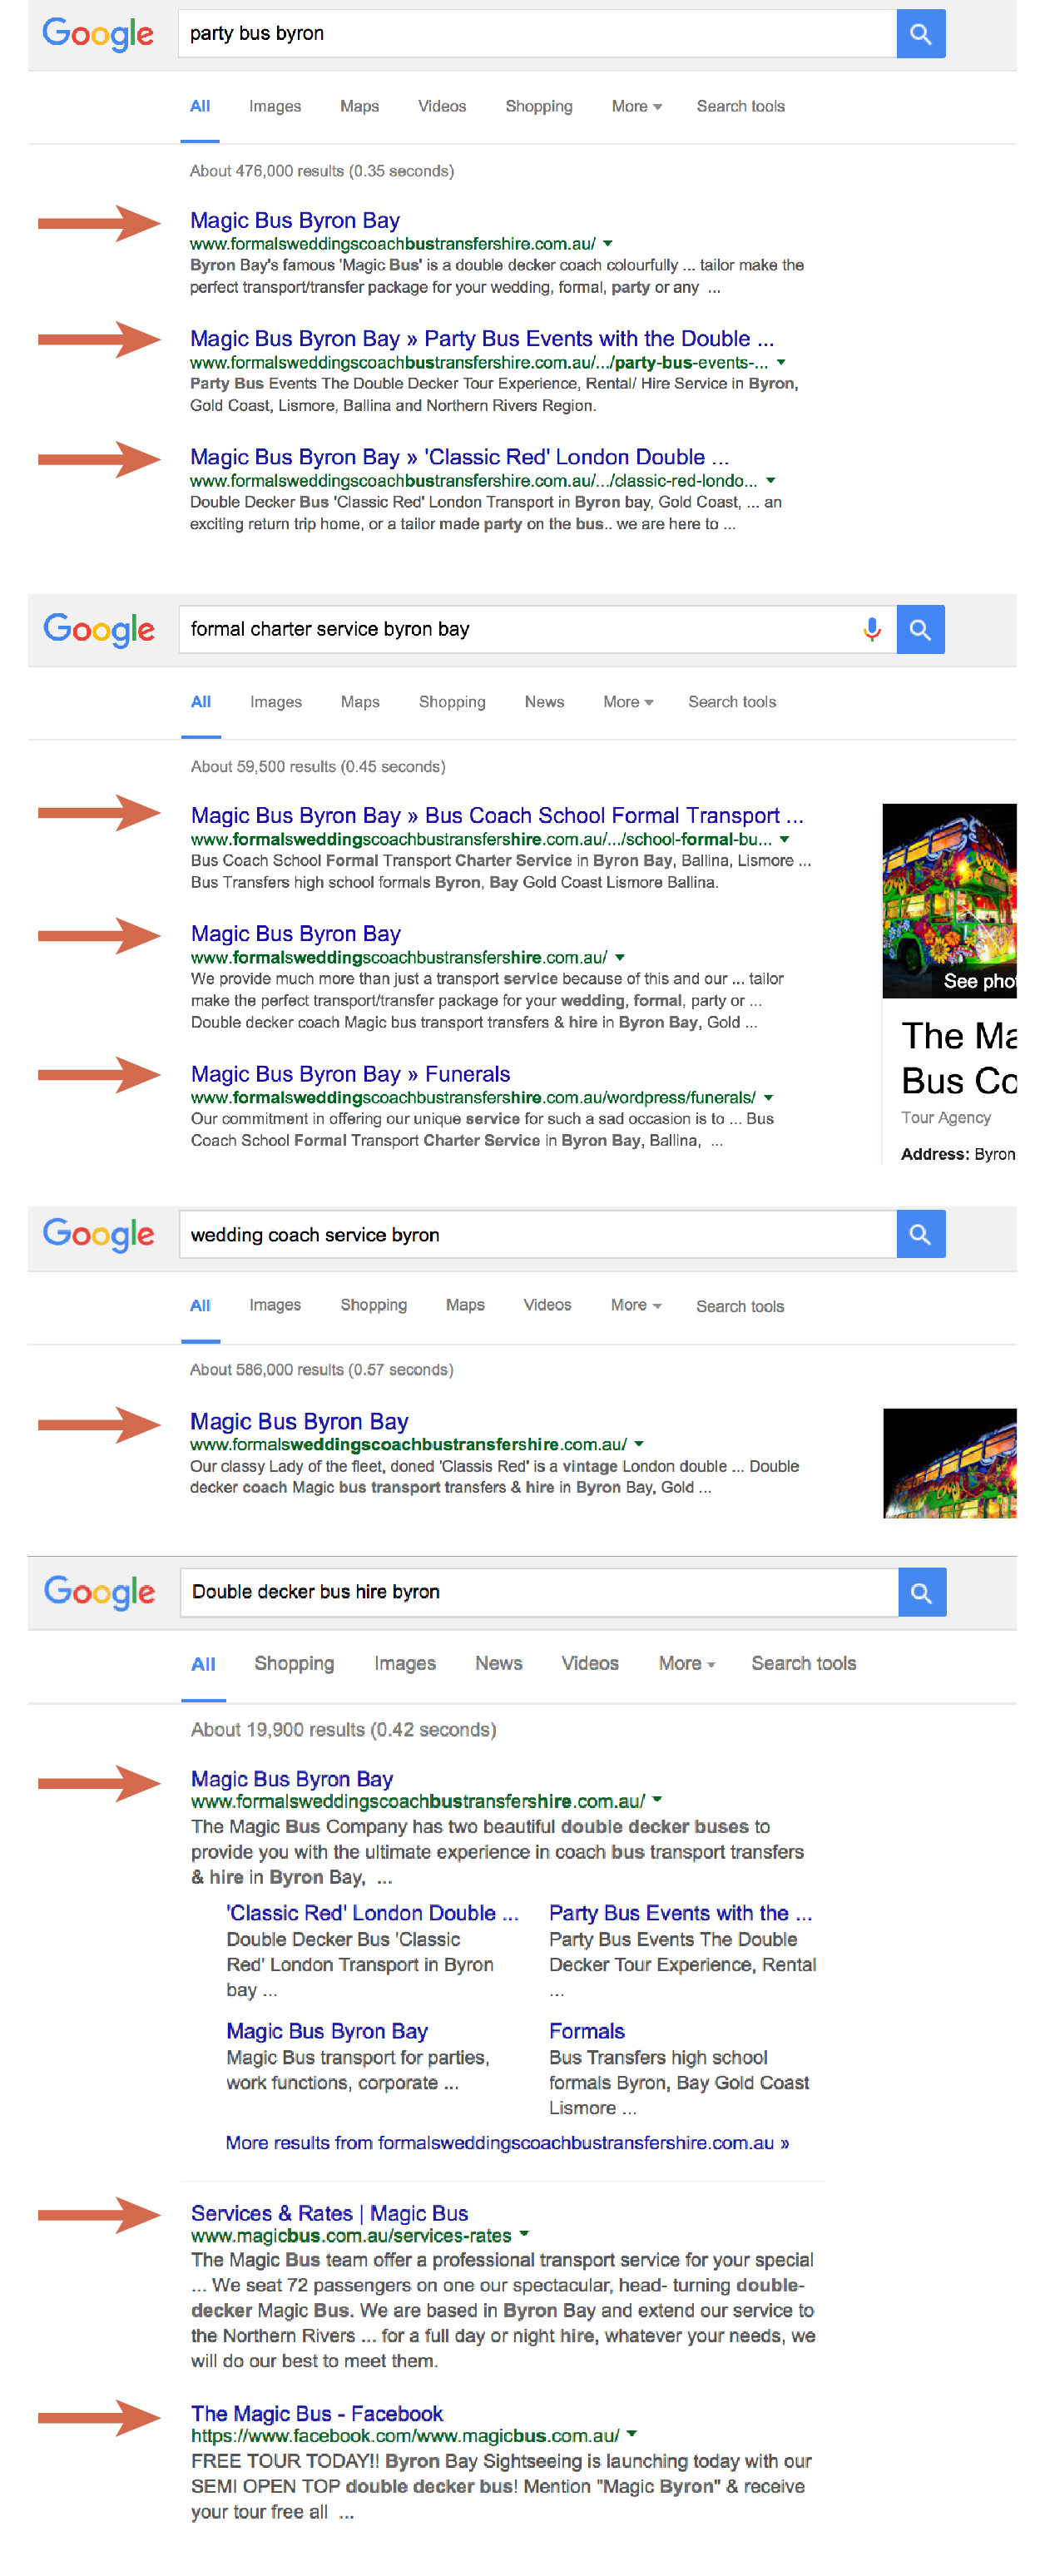 How to get ranked in Google searches, latest website case study example with white hat SEO techniques